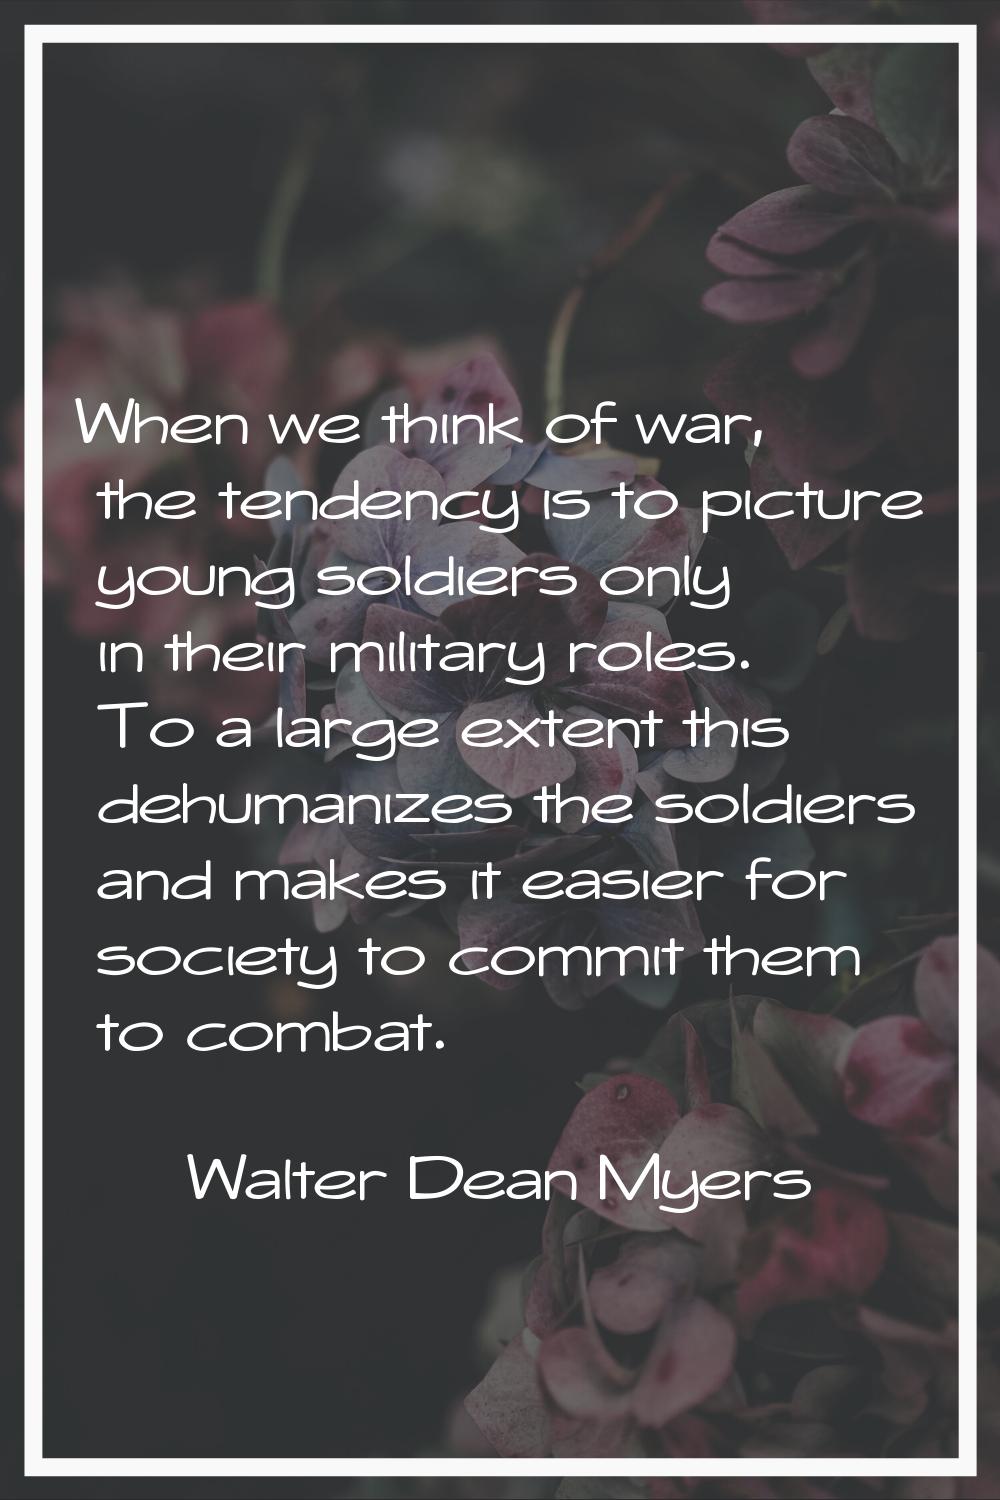 When we think of war, the tendency is to picture young soldiers only in their military roles. To a 